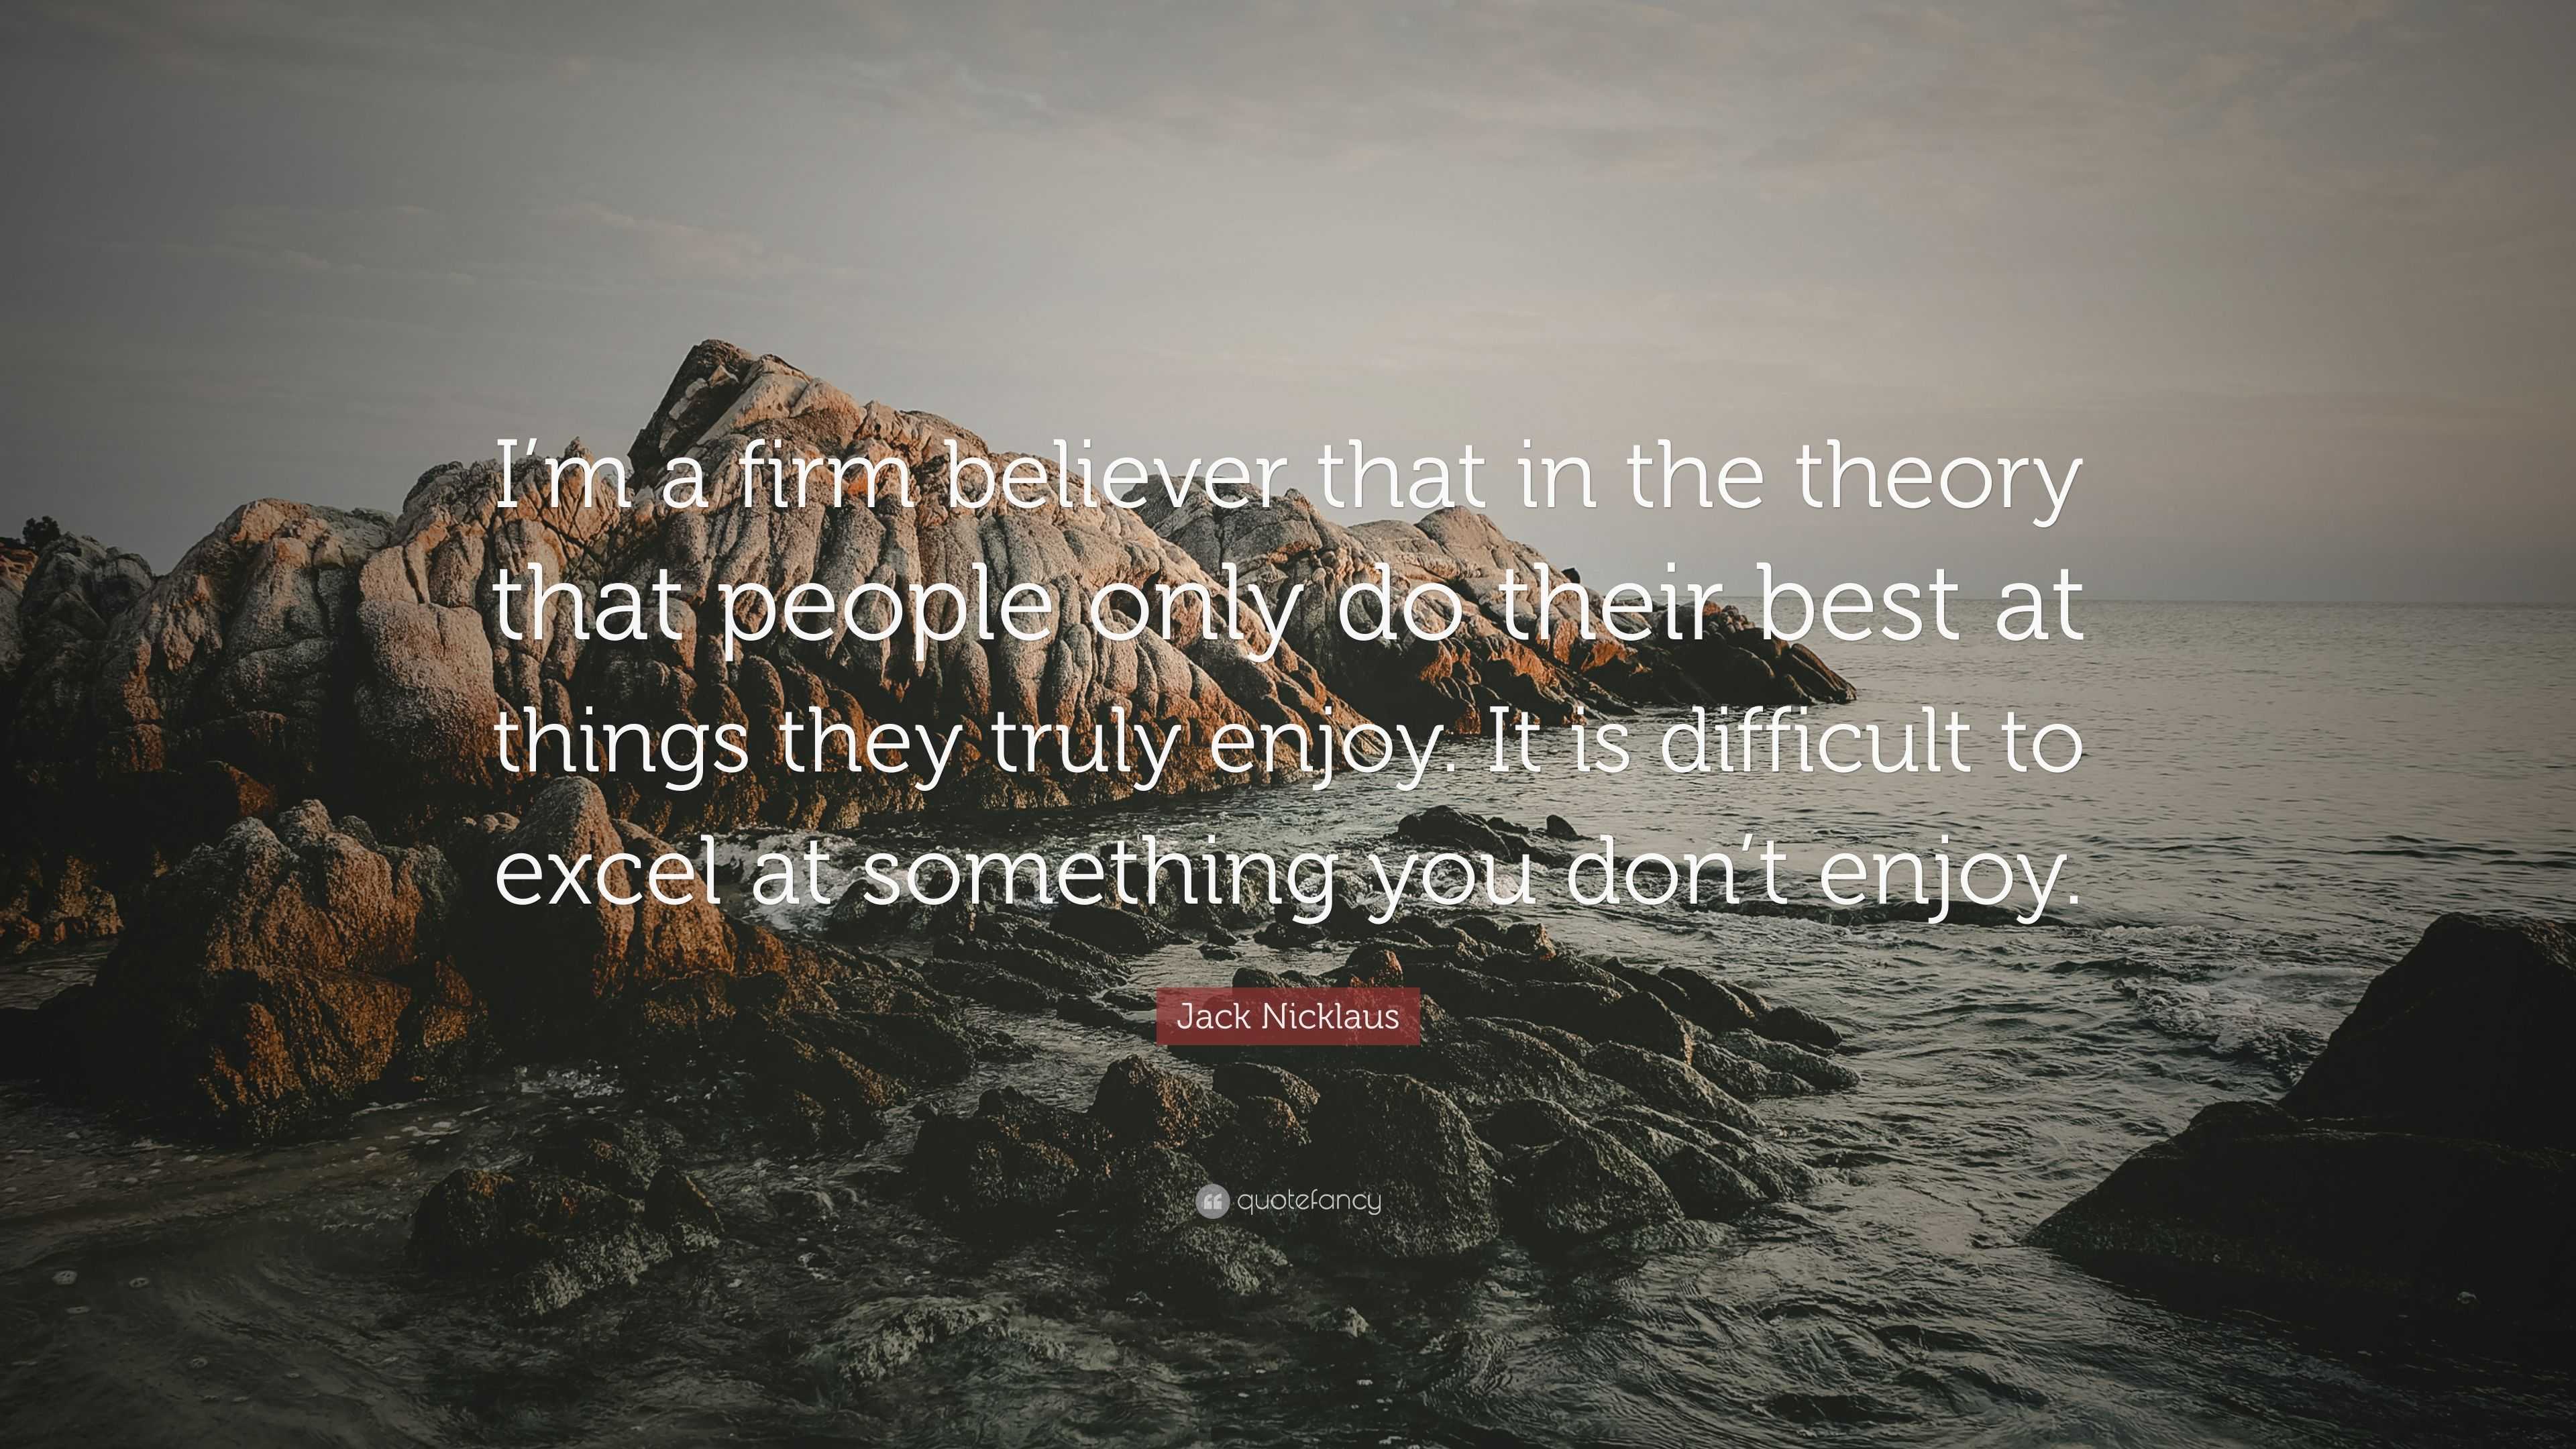 Jack Nicklaus quote: I'm a firm believer that in the theory that people